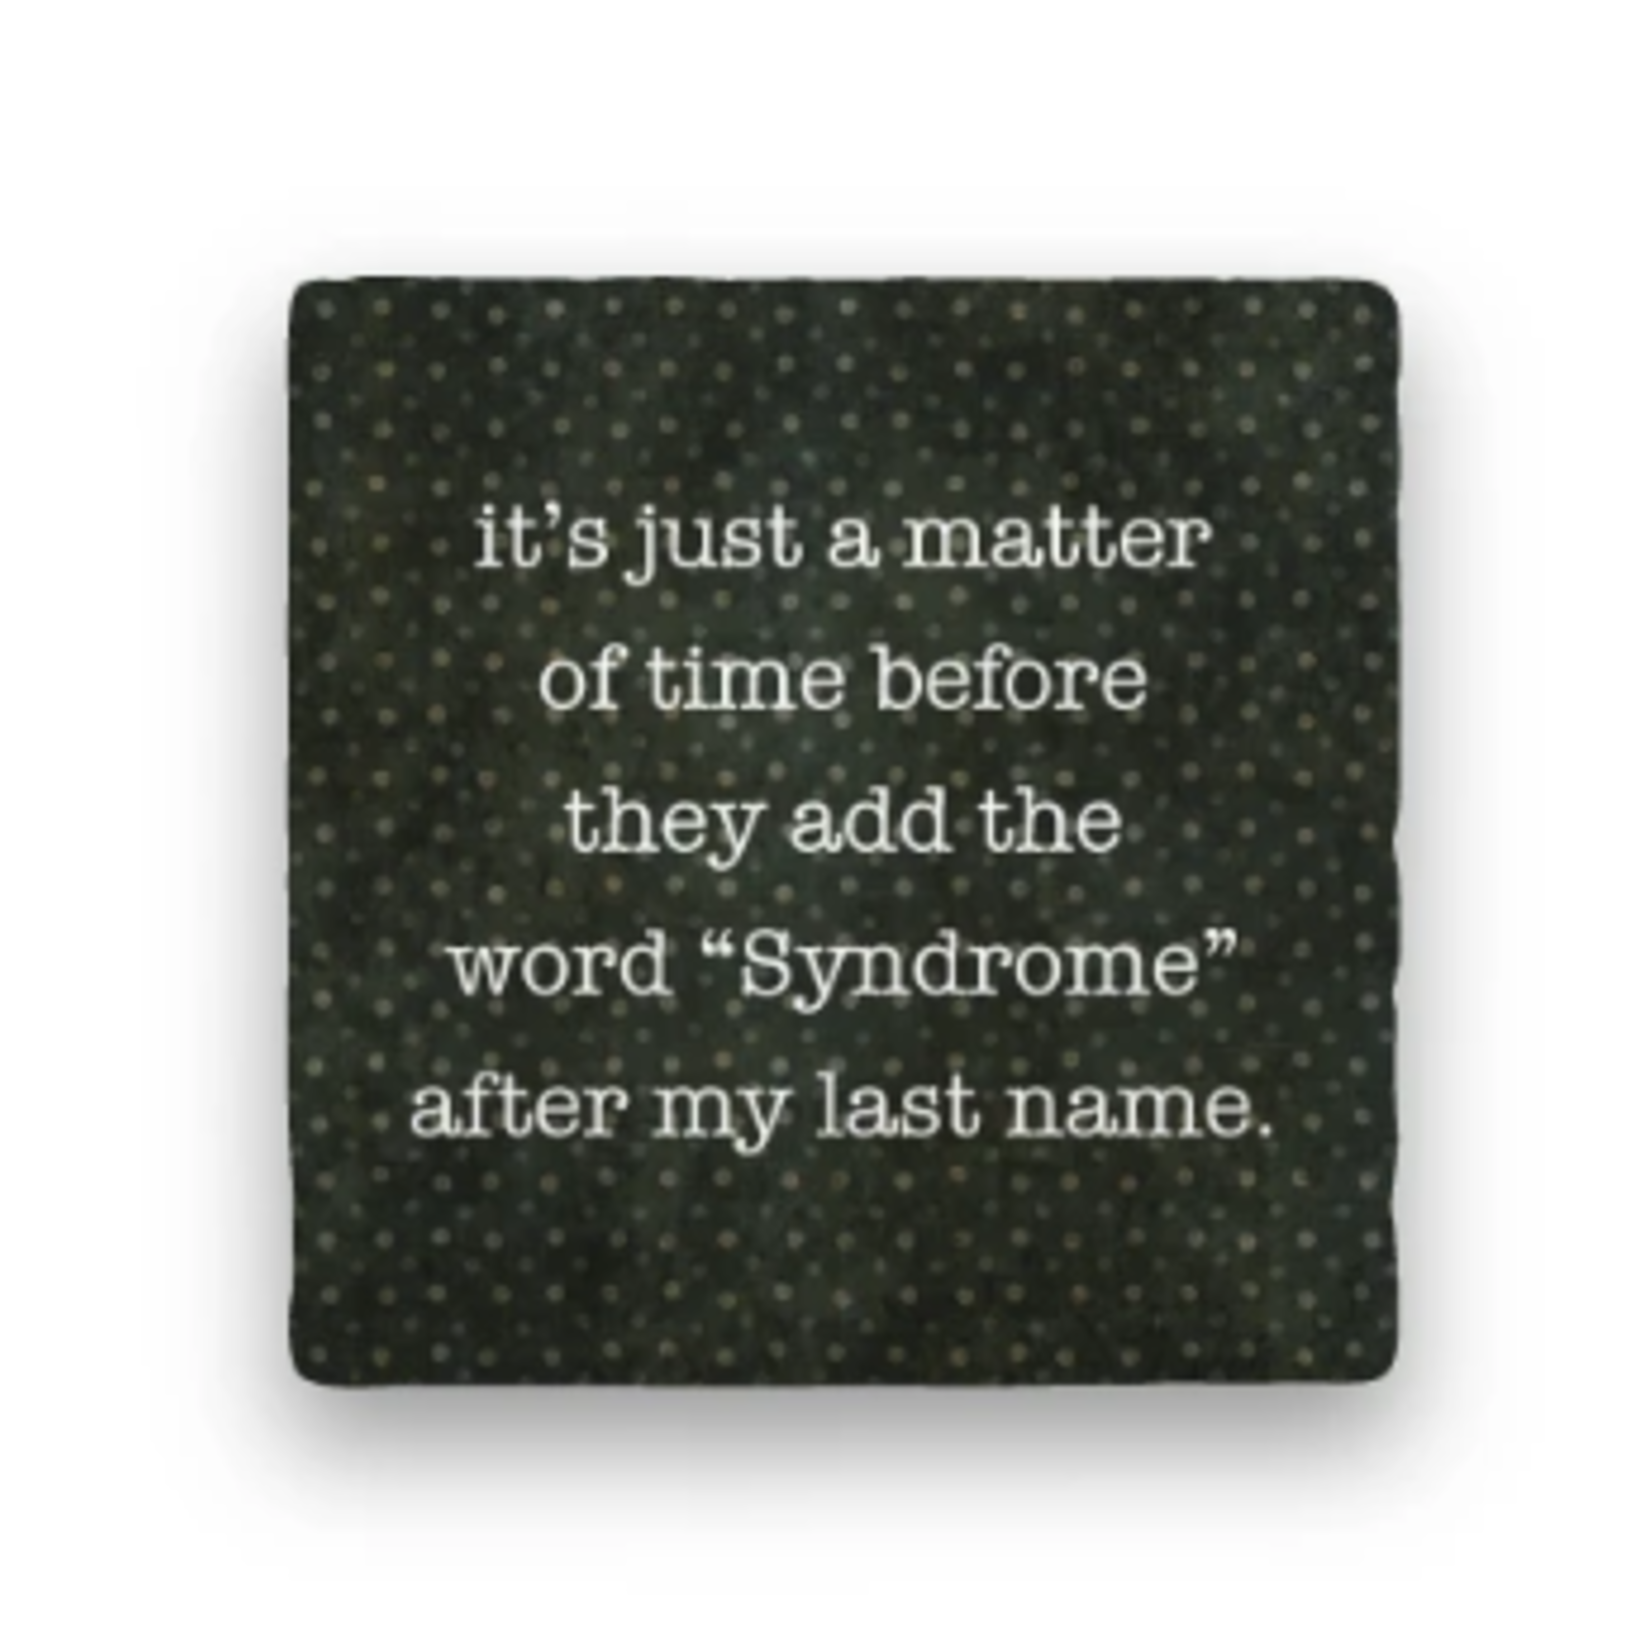 Paisley & Parsley Designs Coaster, Syndrome